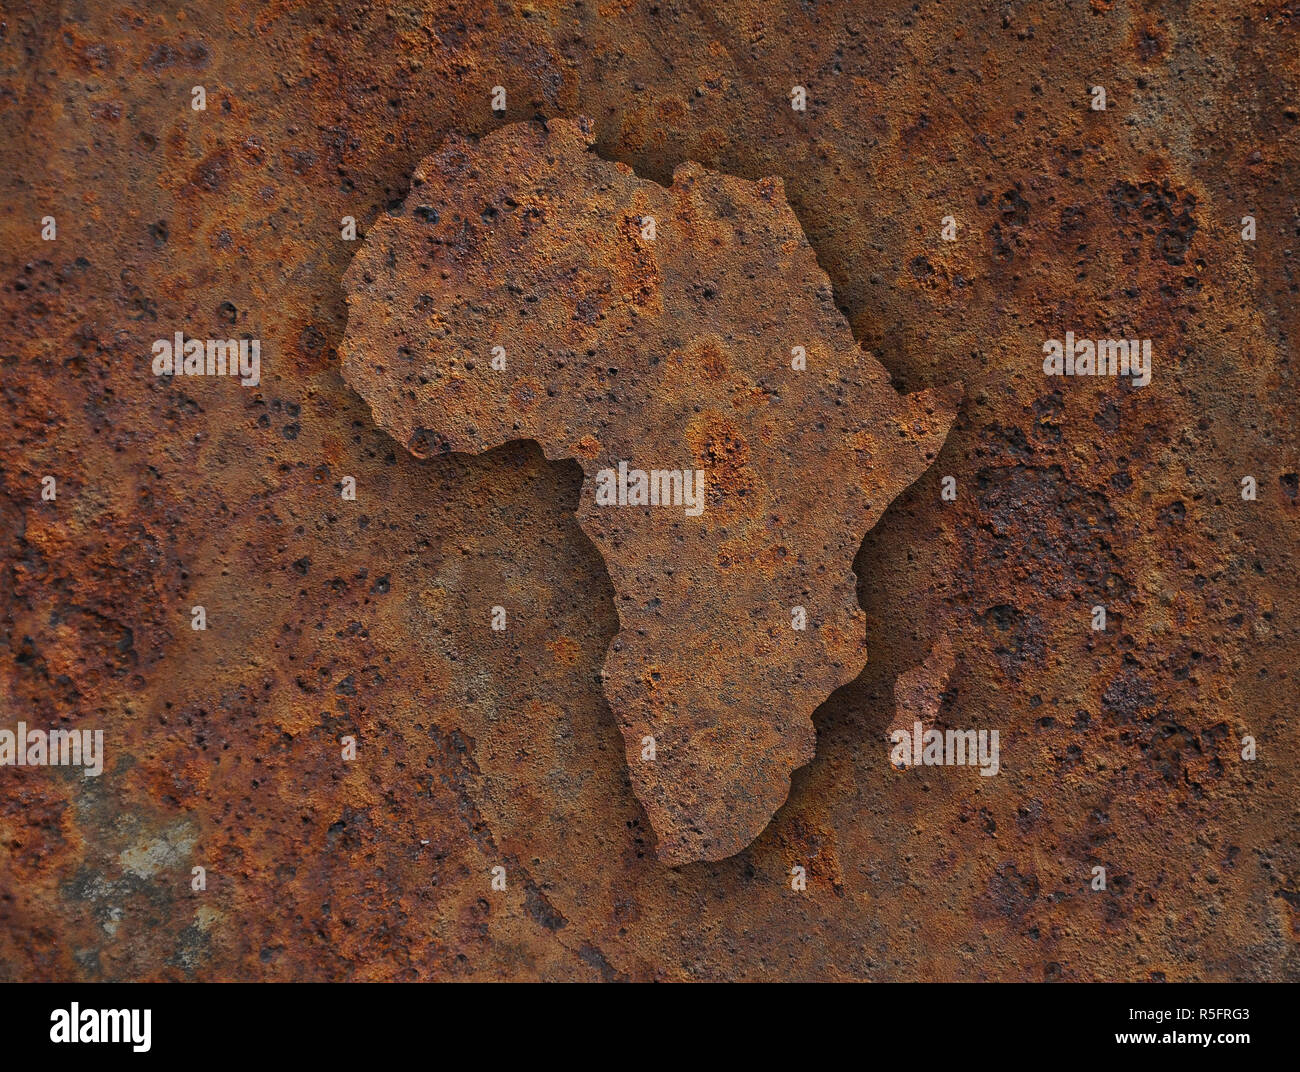 map of africa on rusty metal Stock Photo